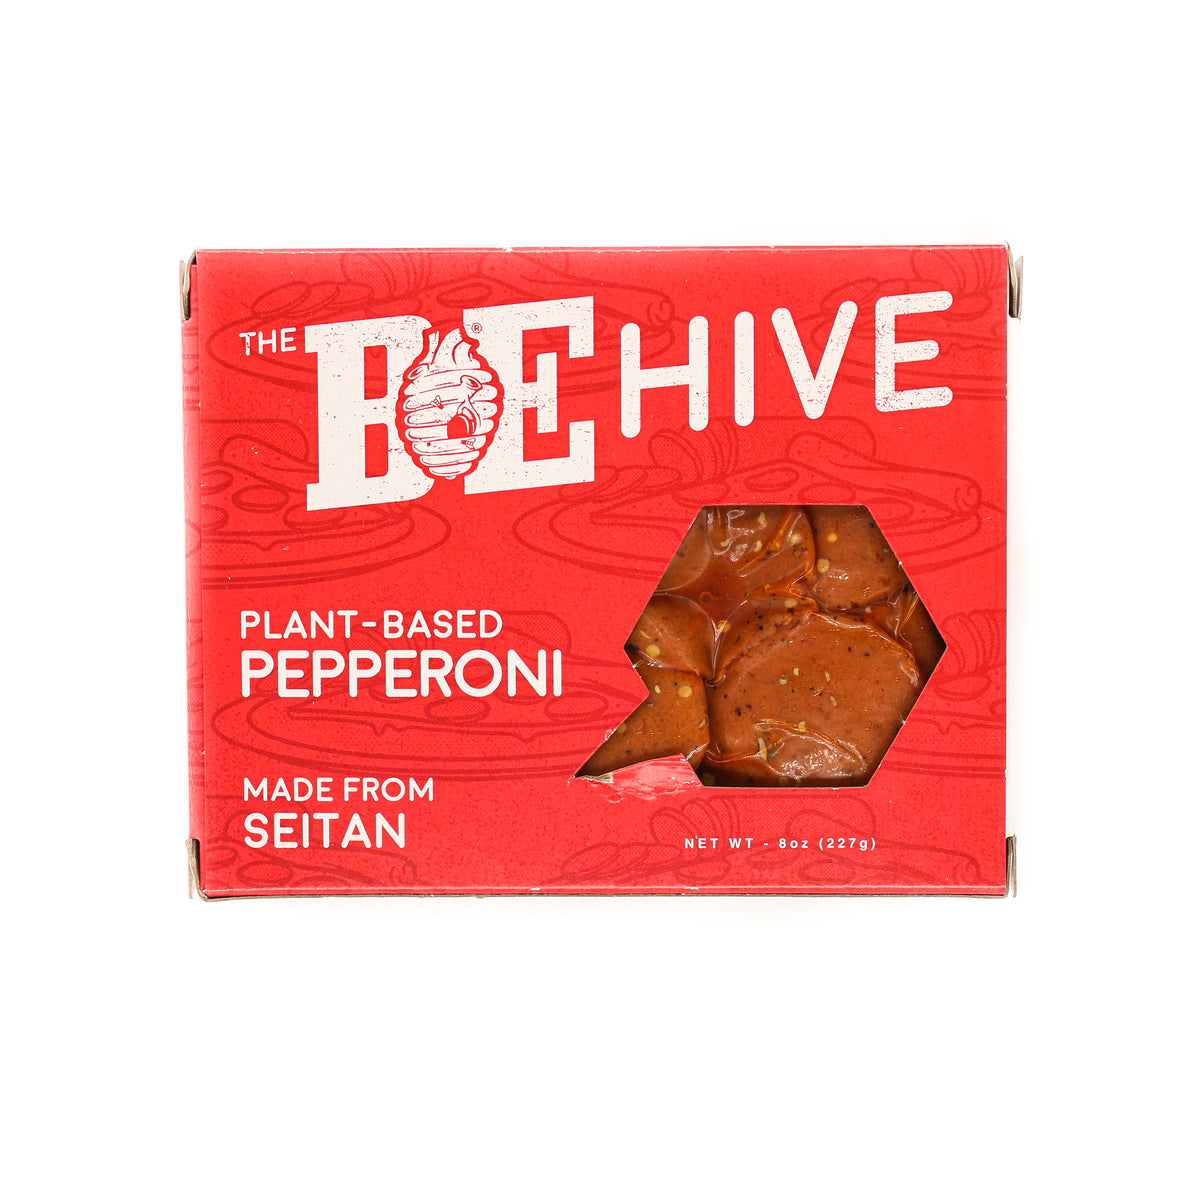 The BE-Hive Pepperoni